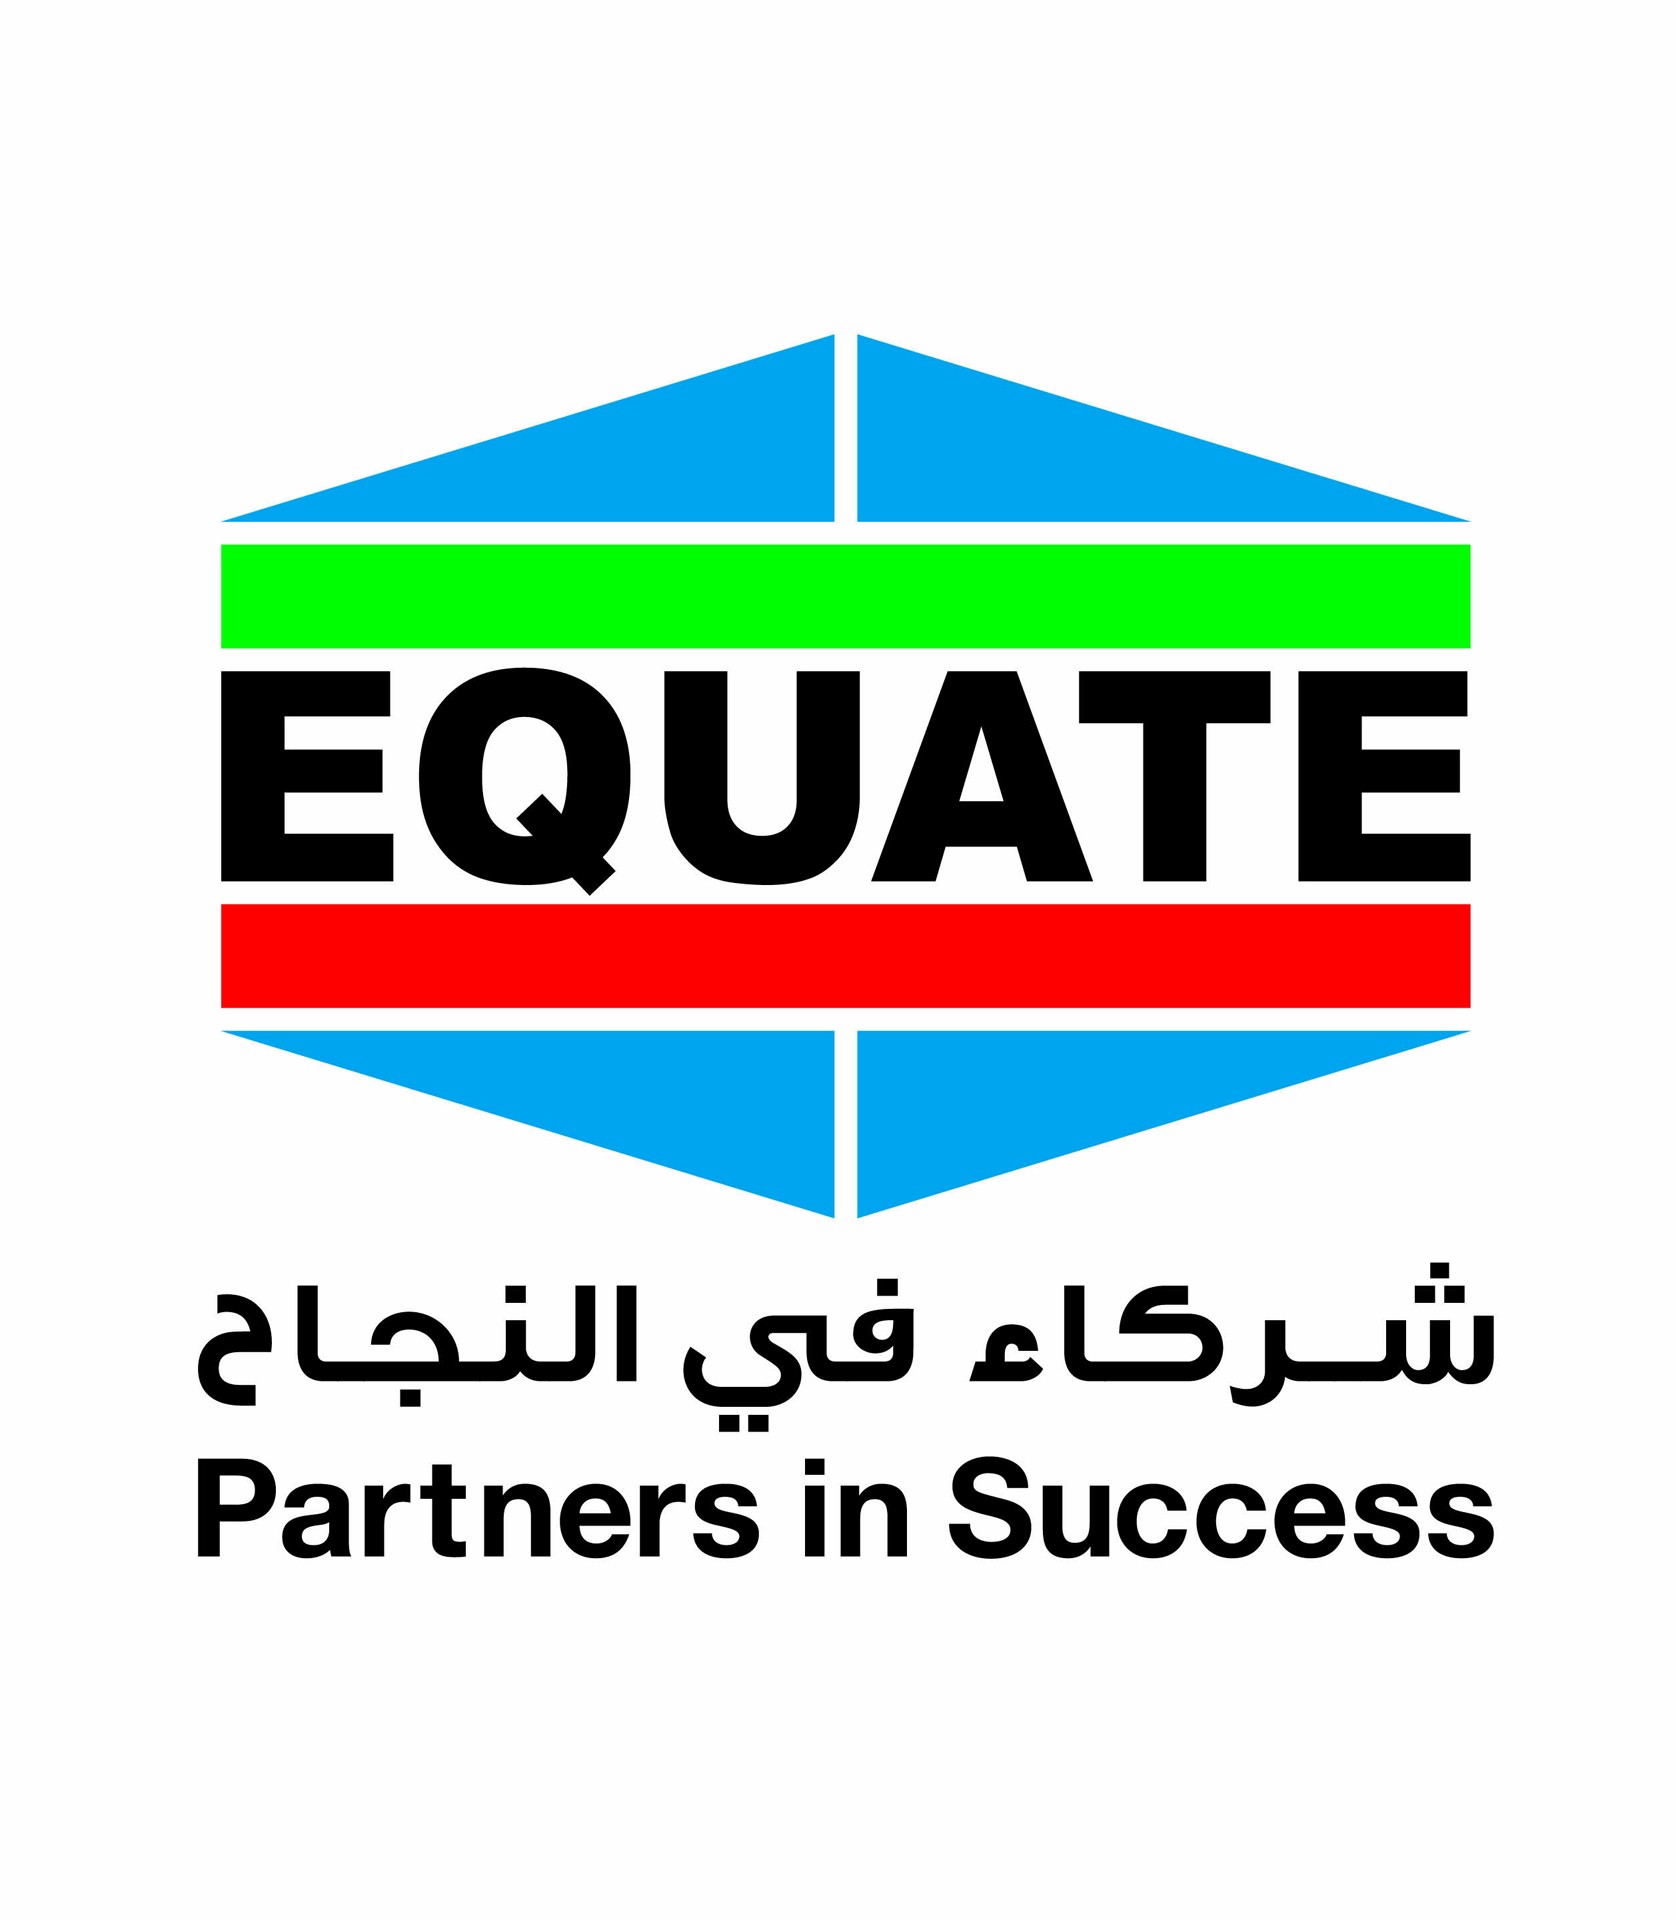 EQUATE participates in Kuwait’s National Days parade on Gulf Road EQUATERS participate in February festivities